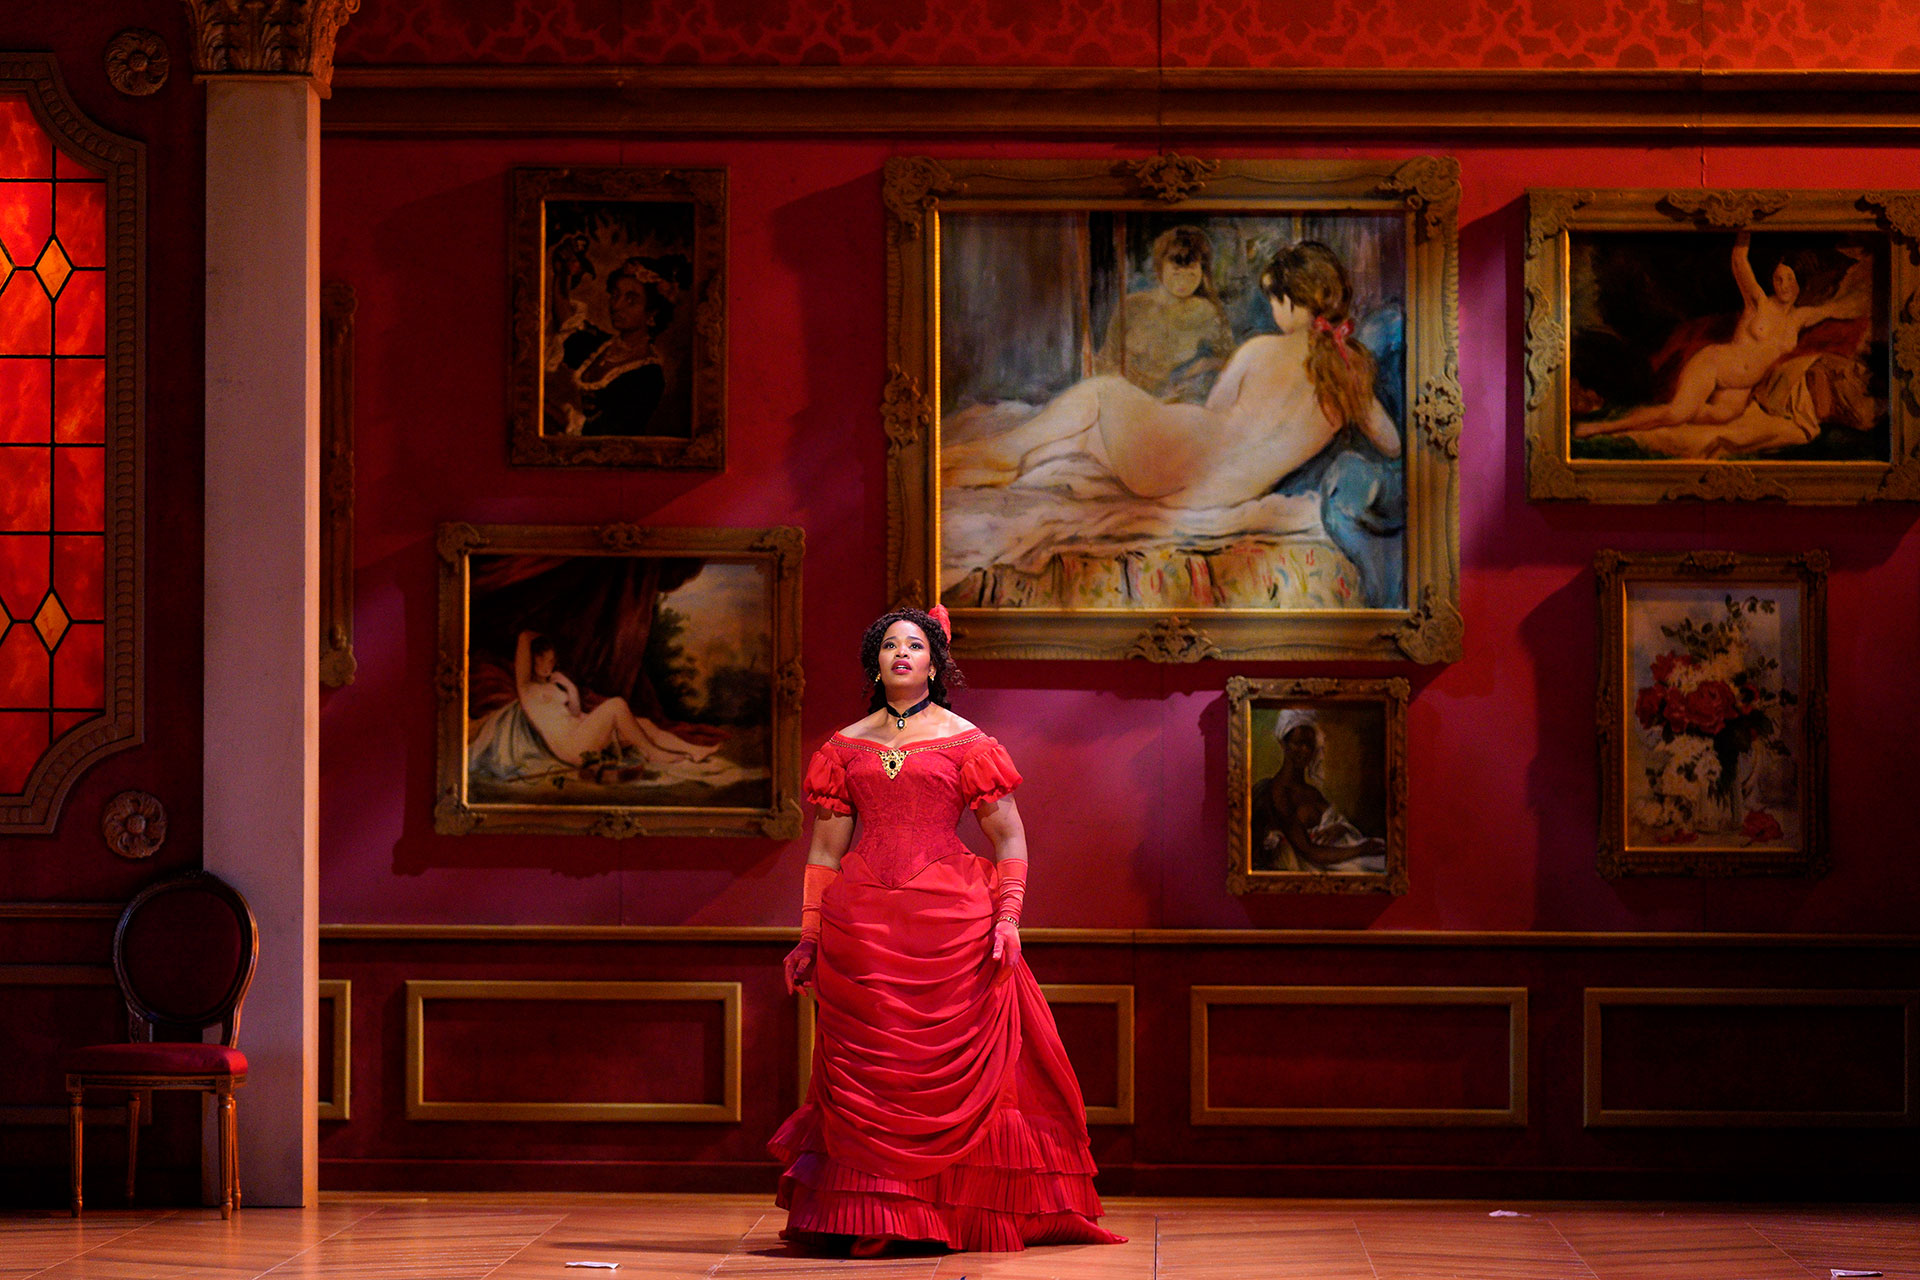 A Black woman in a red dress stands against a parlor wall of deep red, adorned with paintings